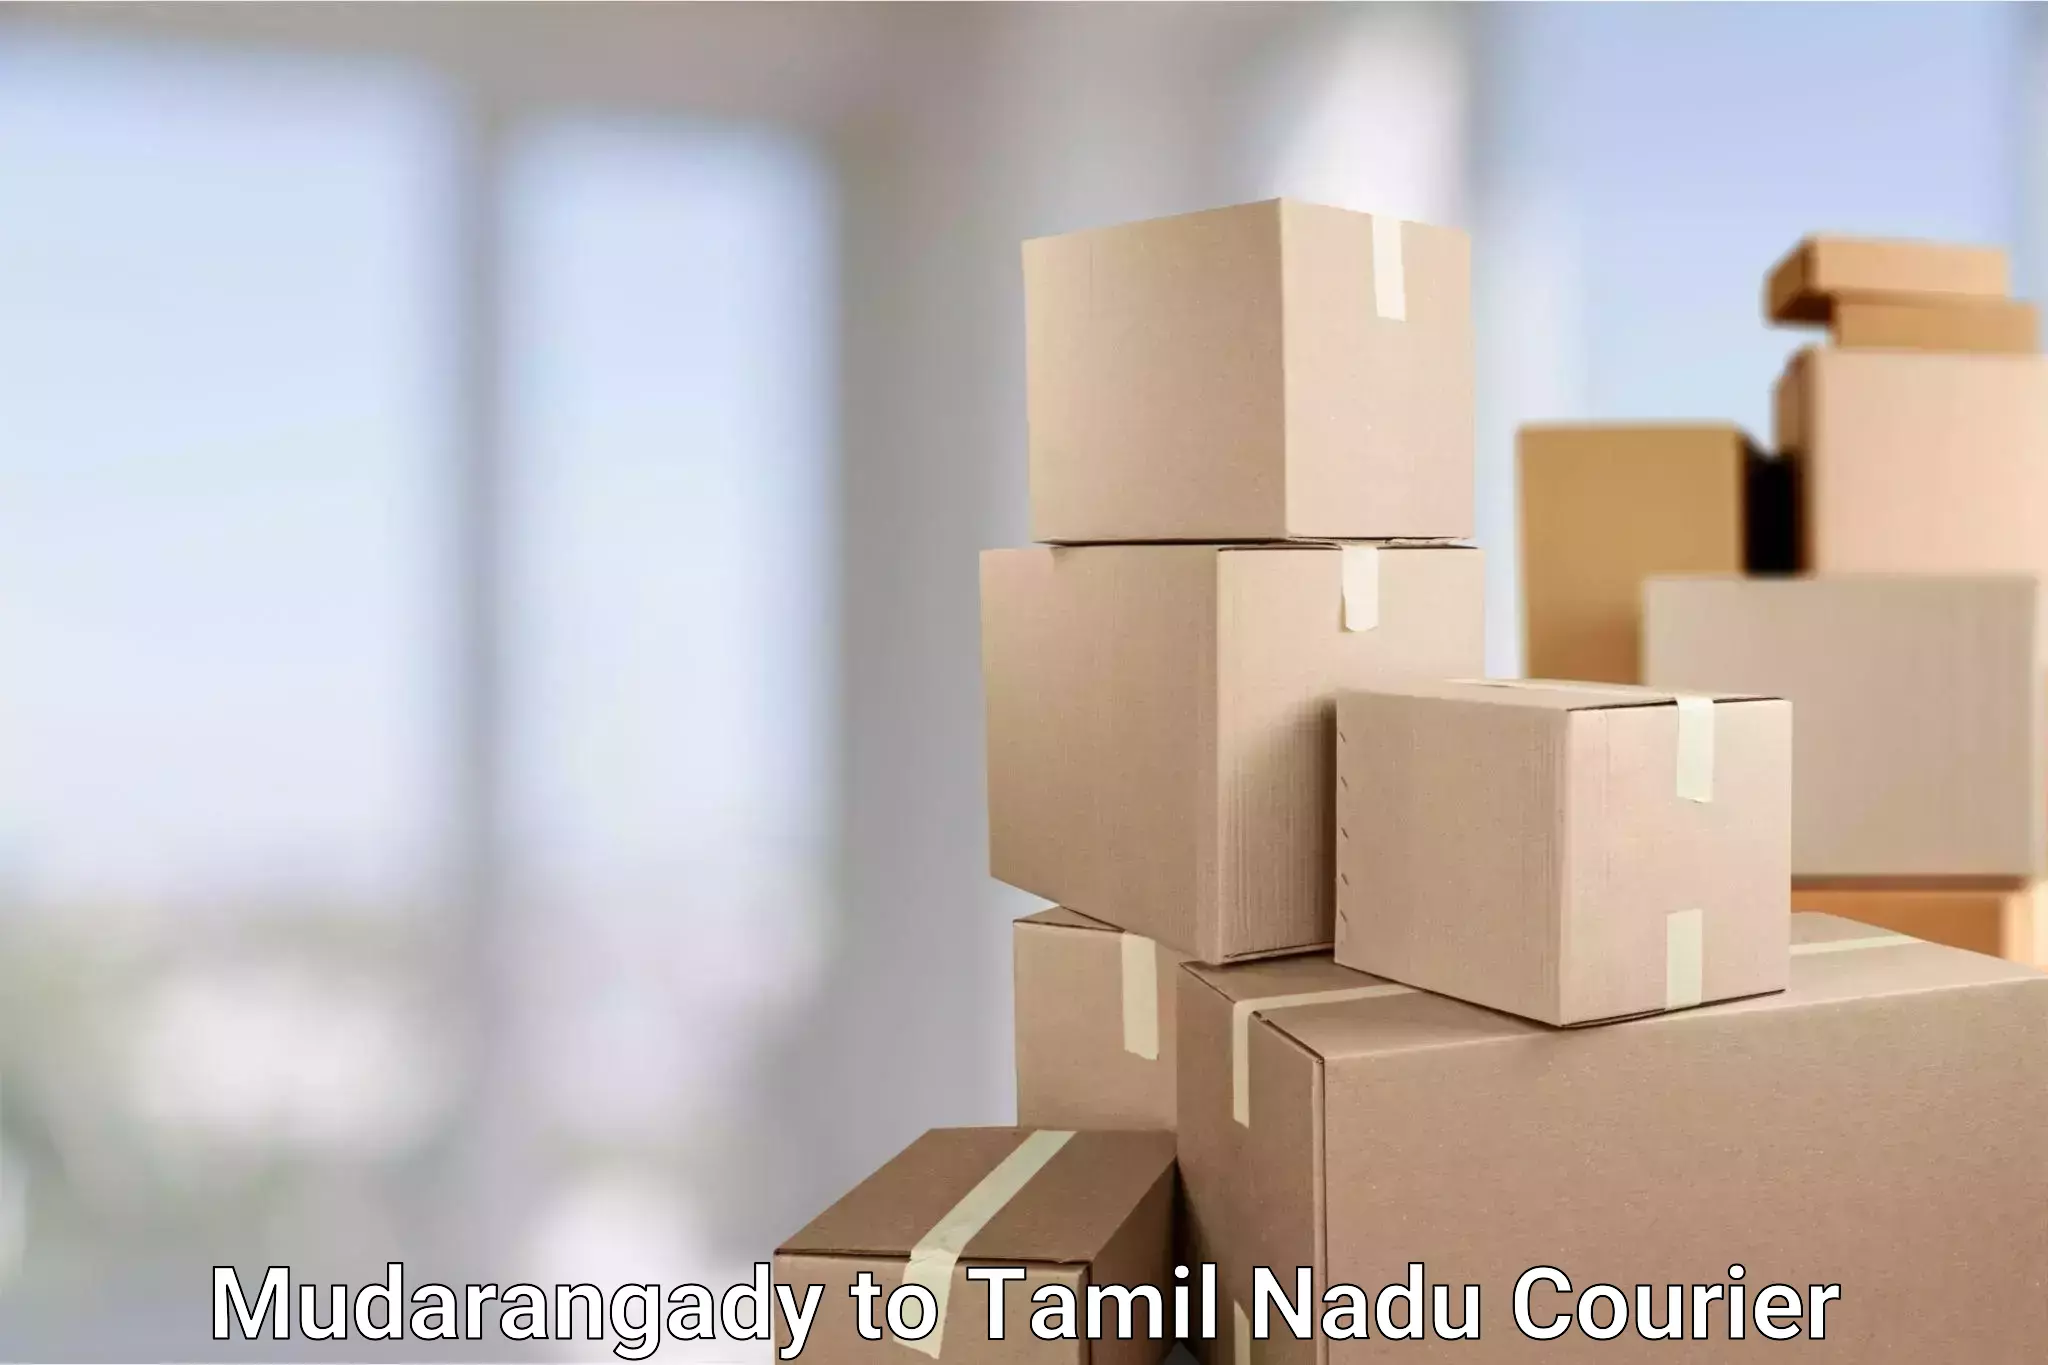 Package delivery network Mudarangady to Perambur